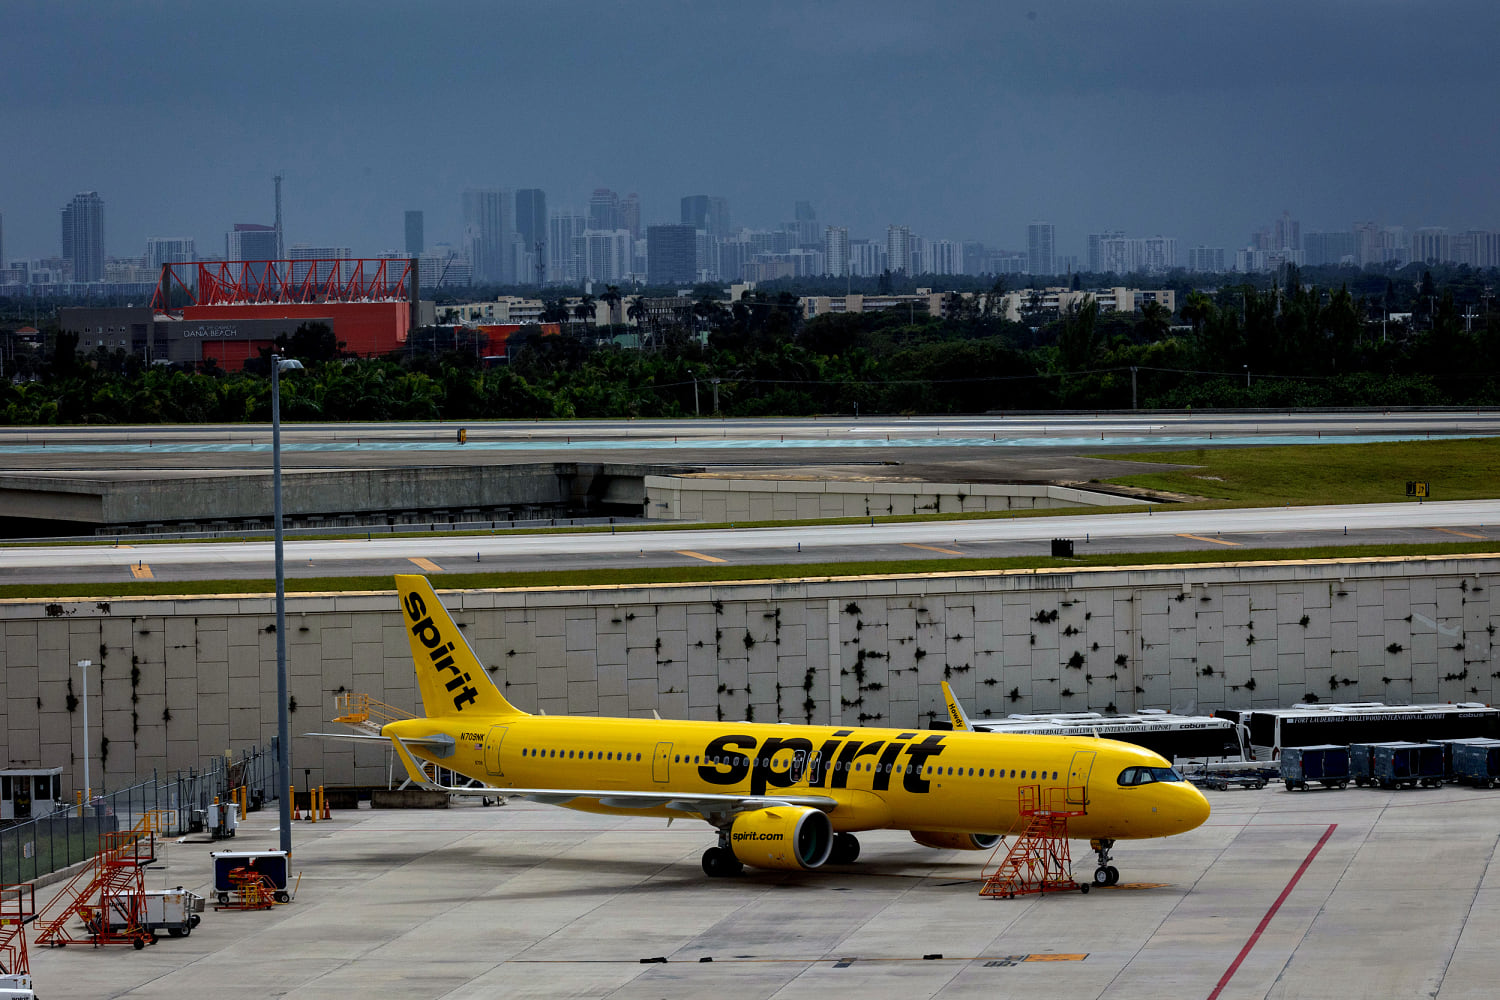 Spirit agent who put child on the wrong flight is no longer working for the airline